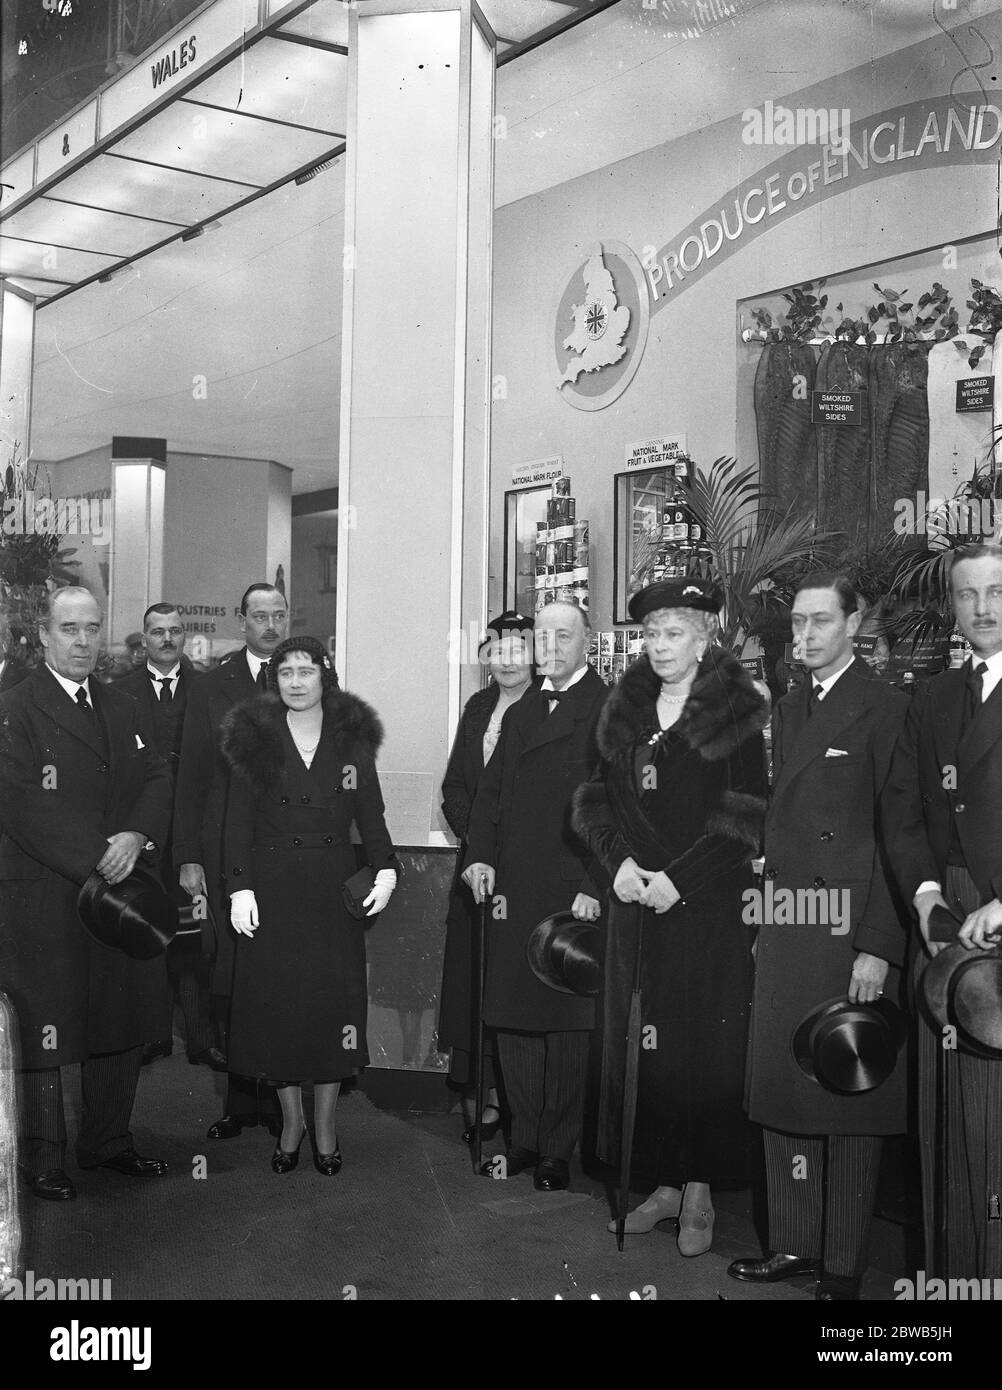 The Queen accompanied by the Duke and Duchess of York , during her visit to the British Industries Fair at the White City . 20 February 1934 Stock Photo